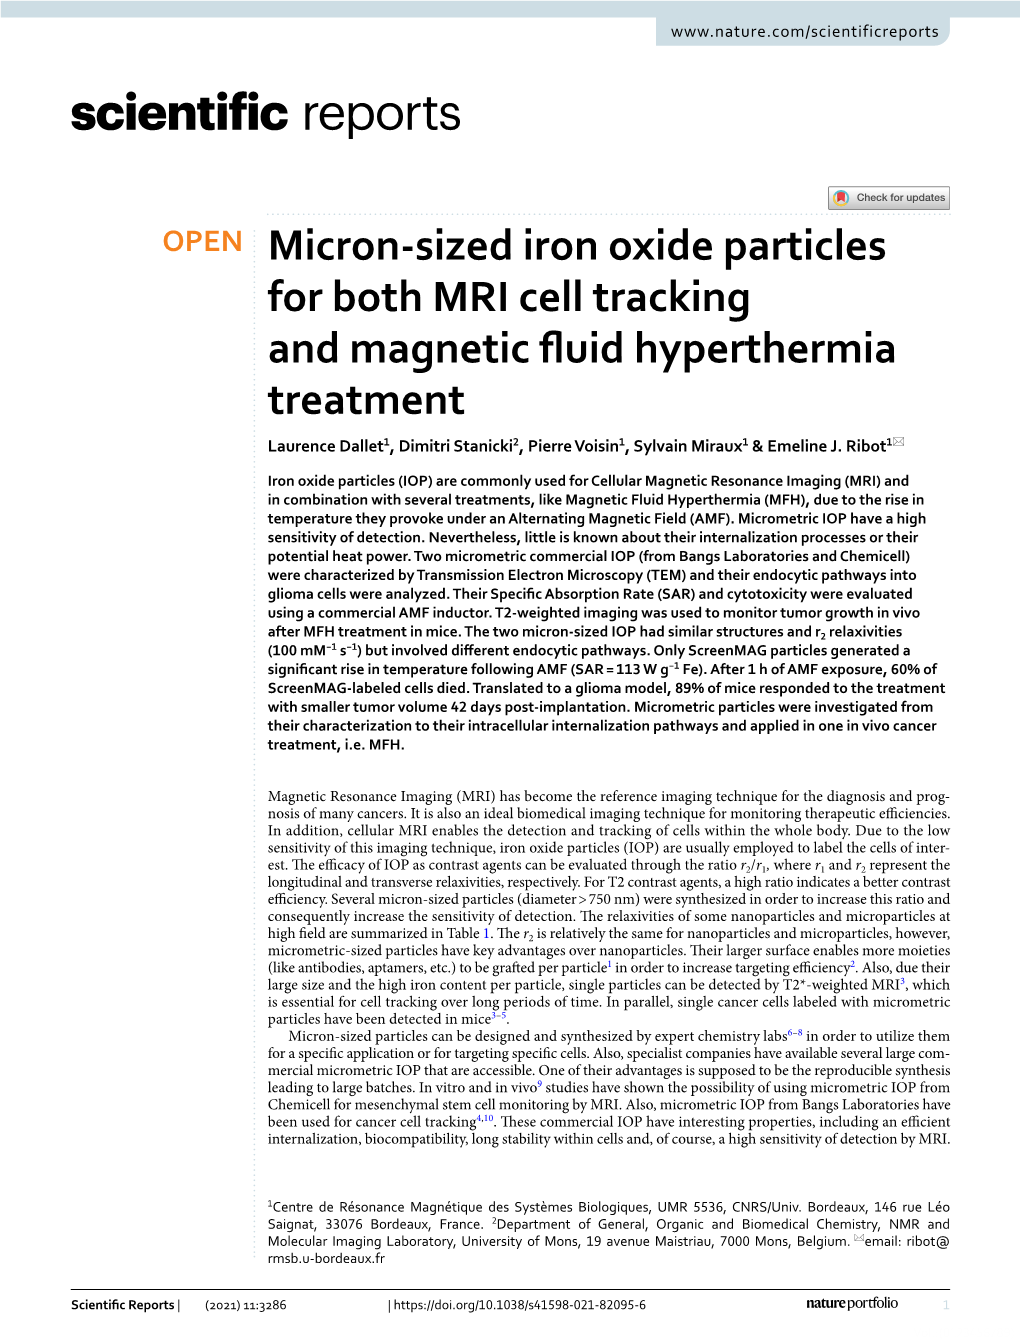 Micron-Sized Iron Oxide Particles for Both MRI Cell Tracking and Magnetic